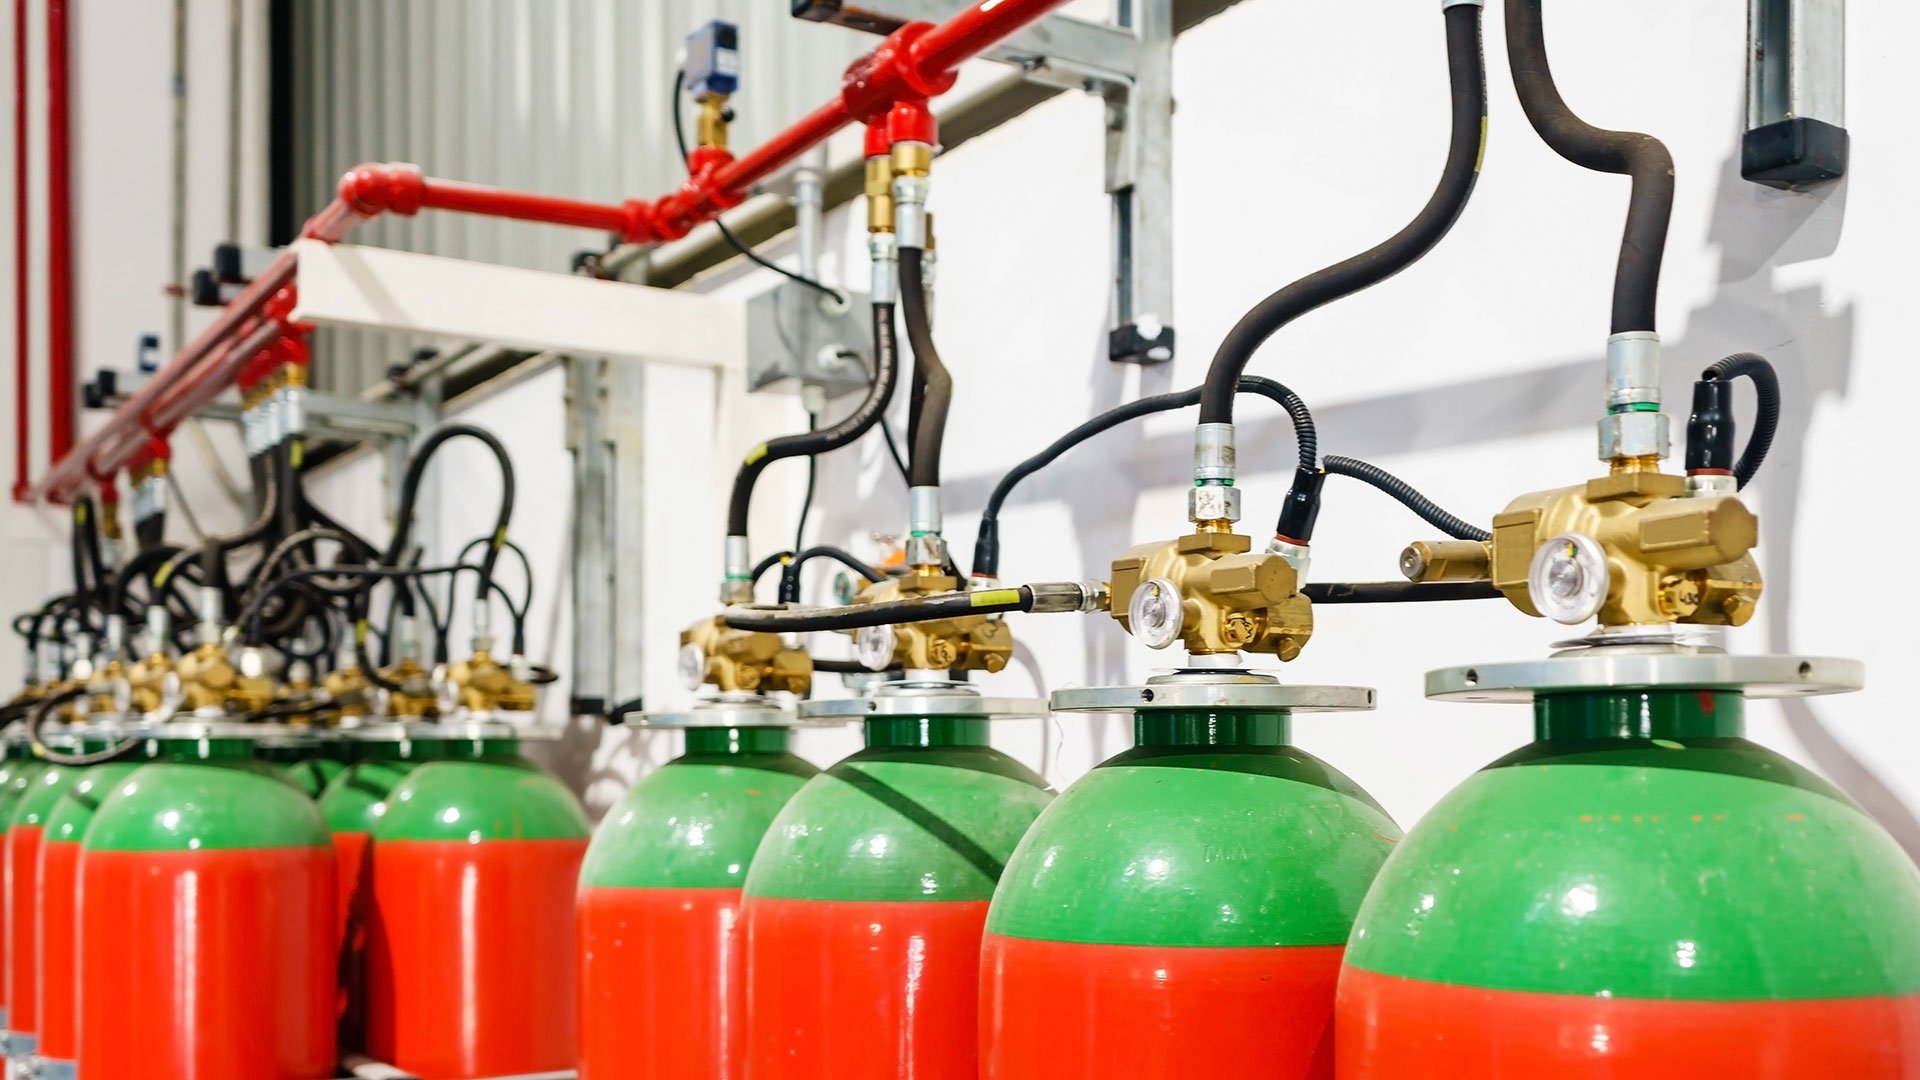 Fire safety systems, pharmaceutical production site, hazardous fluids, upgrade fire prevention systems